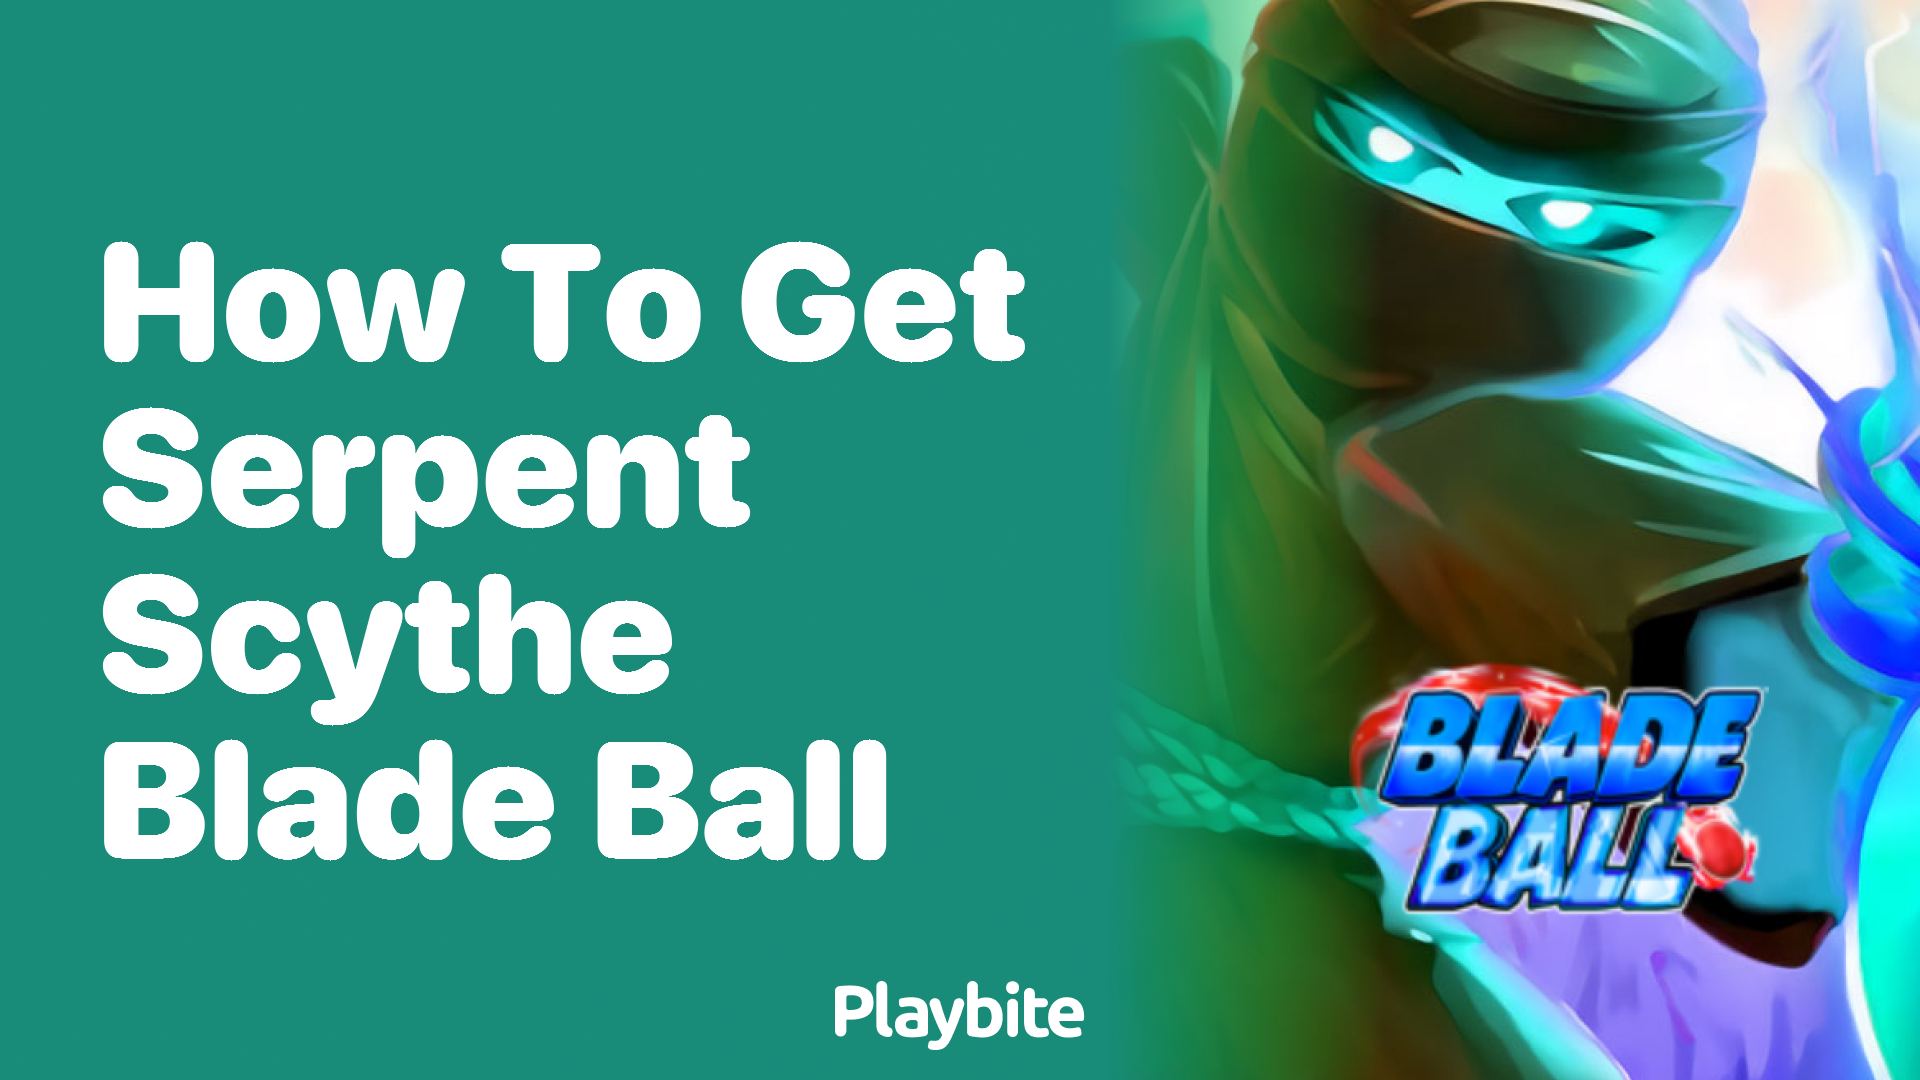 How to Get the Serpent Scythe in Blade Ball